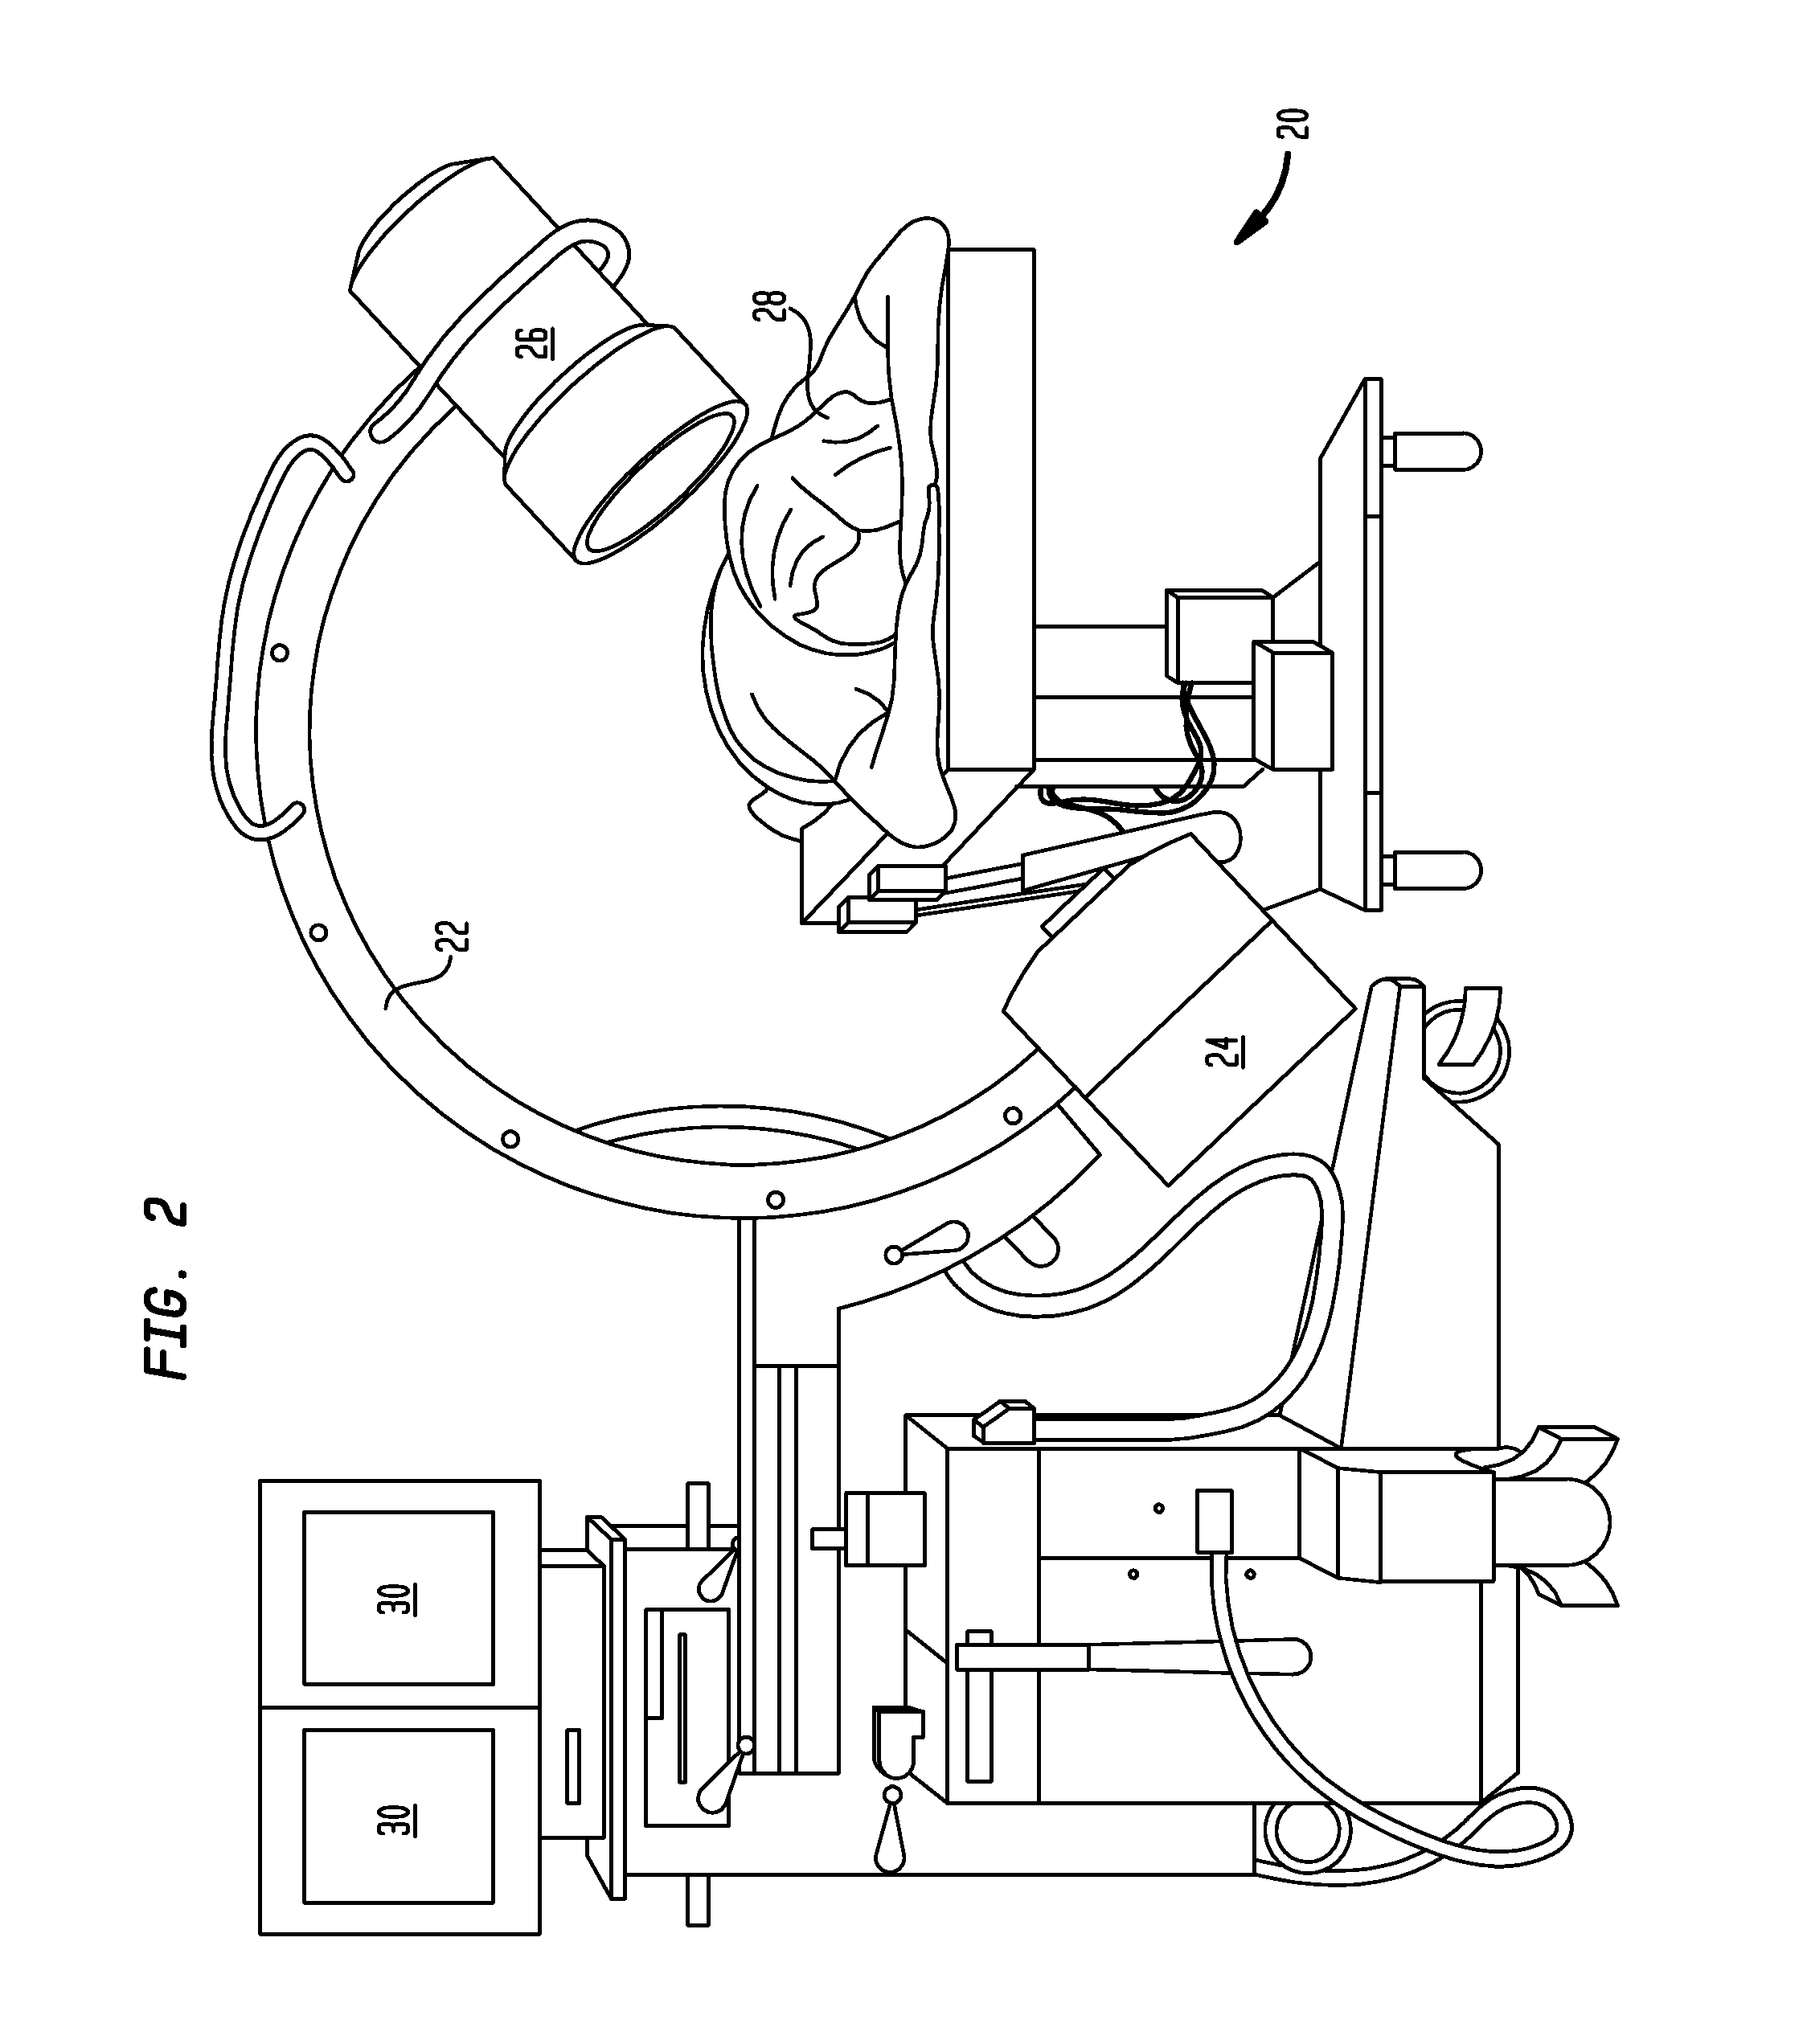 Simulation system and methods for surgical training